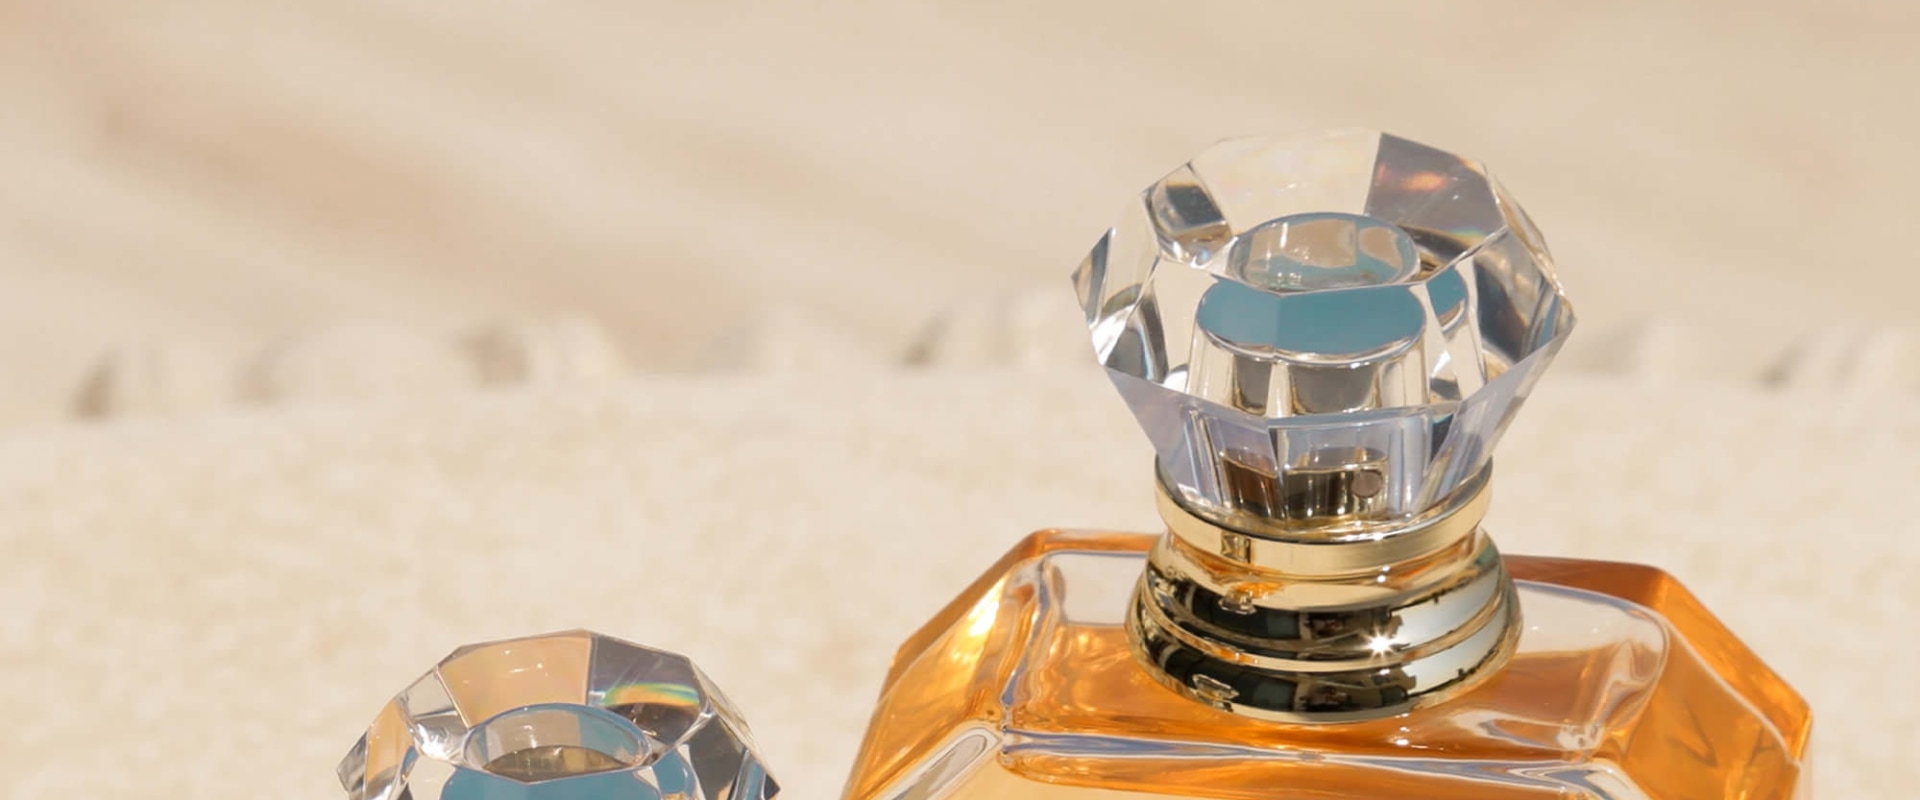 Shipping Perfumes: How to Send Fragrances Safely